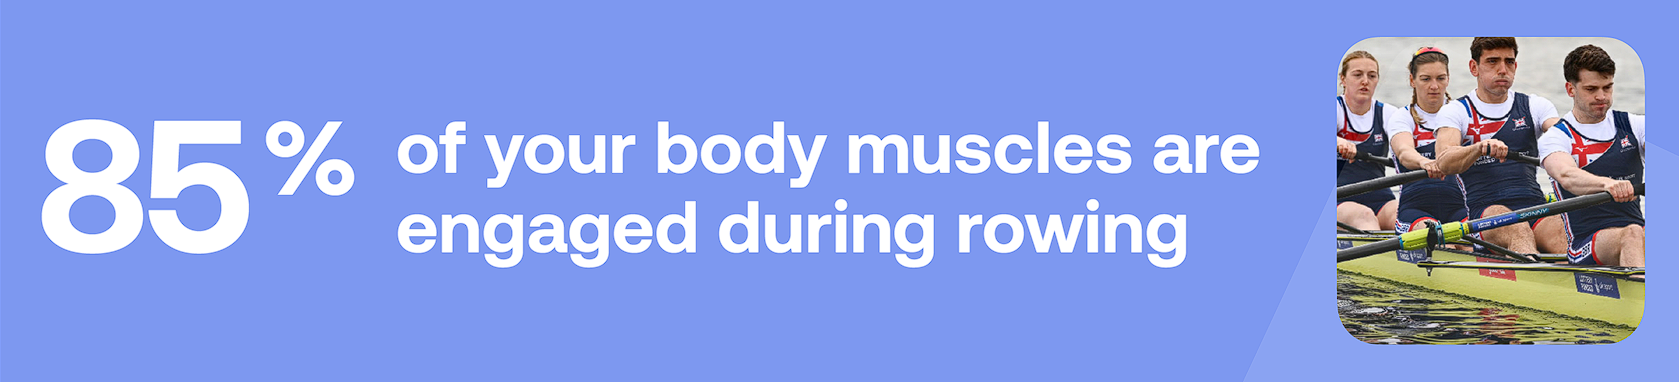 85% of your body muscles are engaged during rowing